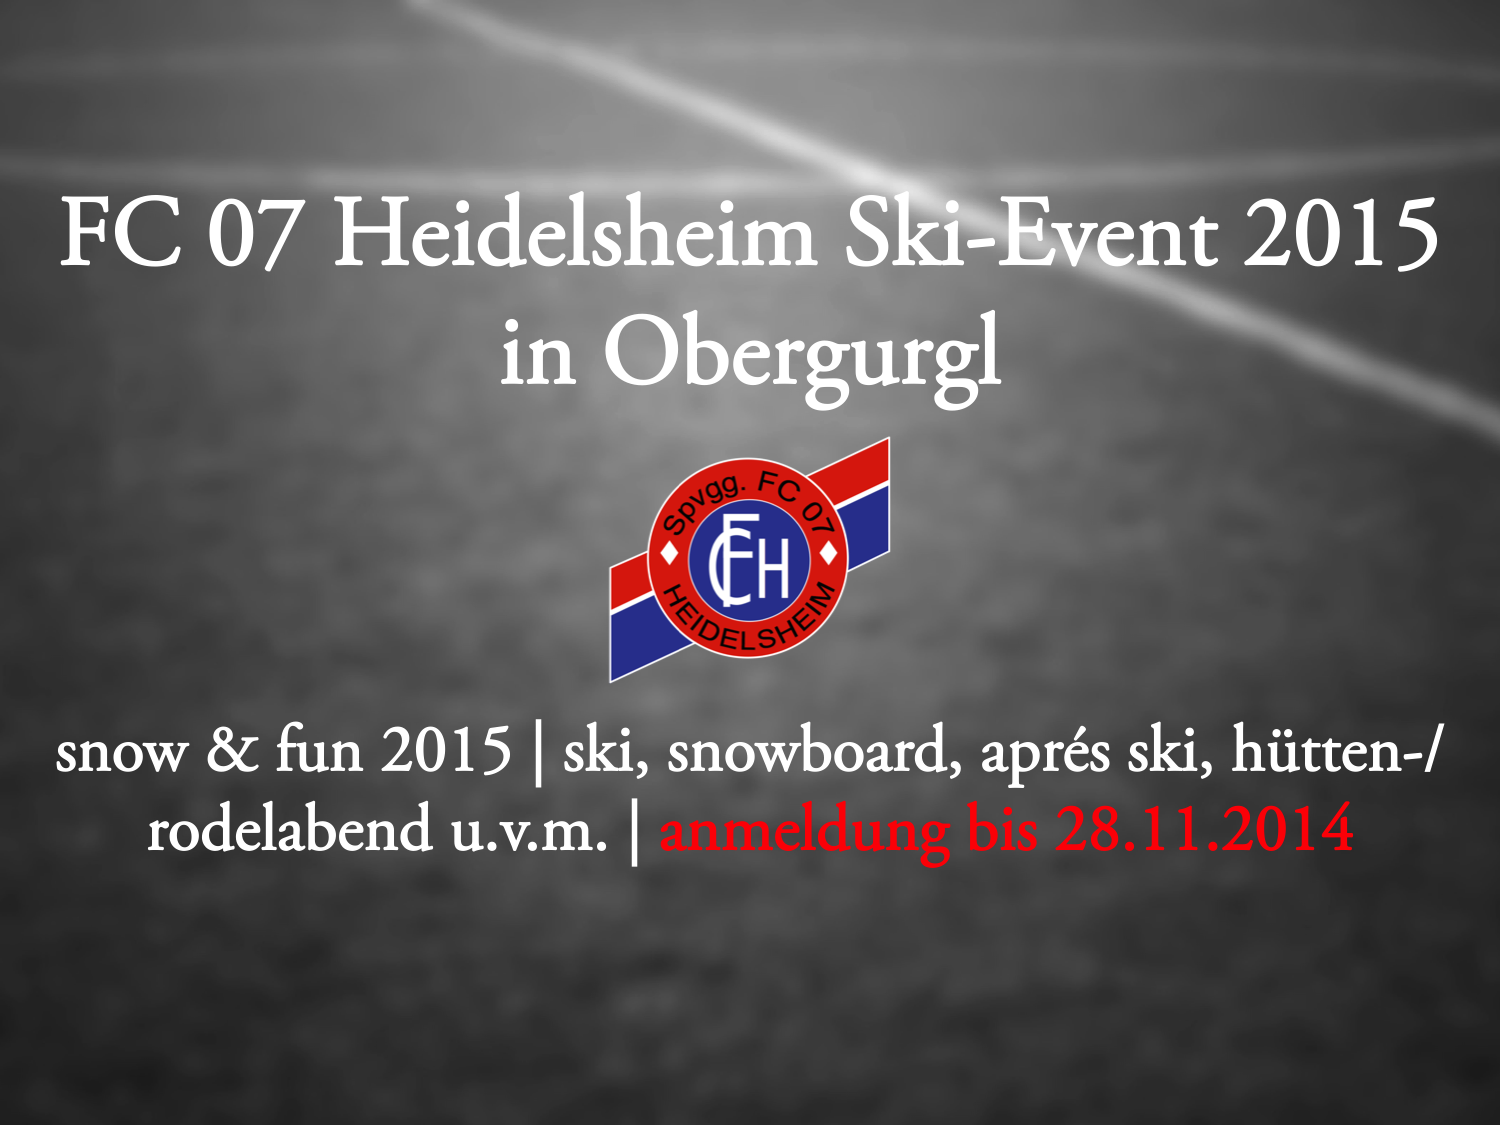 You are currently viewing Jetzt noch anmelden: FC 07 Heidelsheim – Ski-Event 2015!